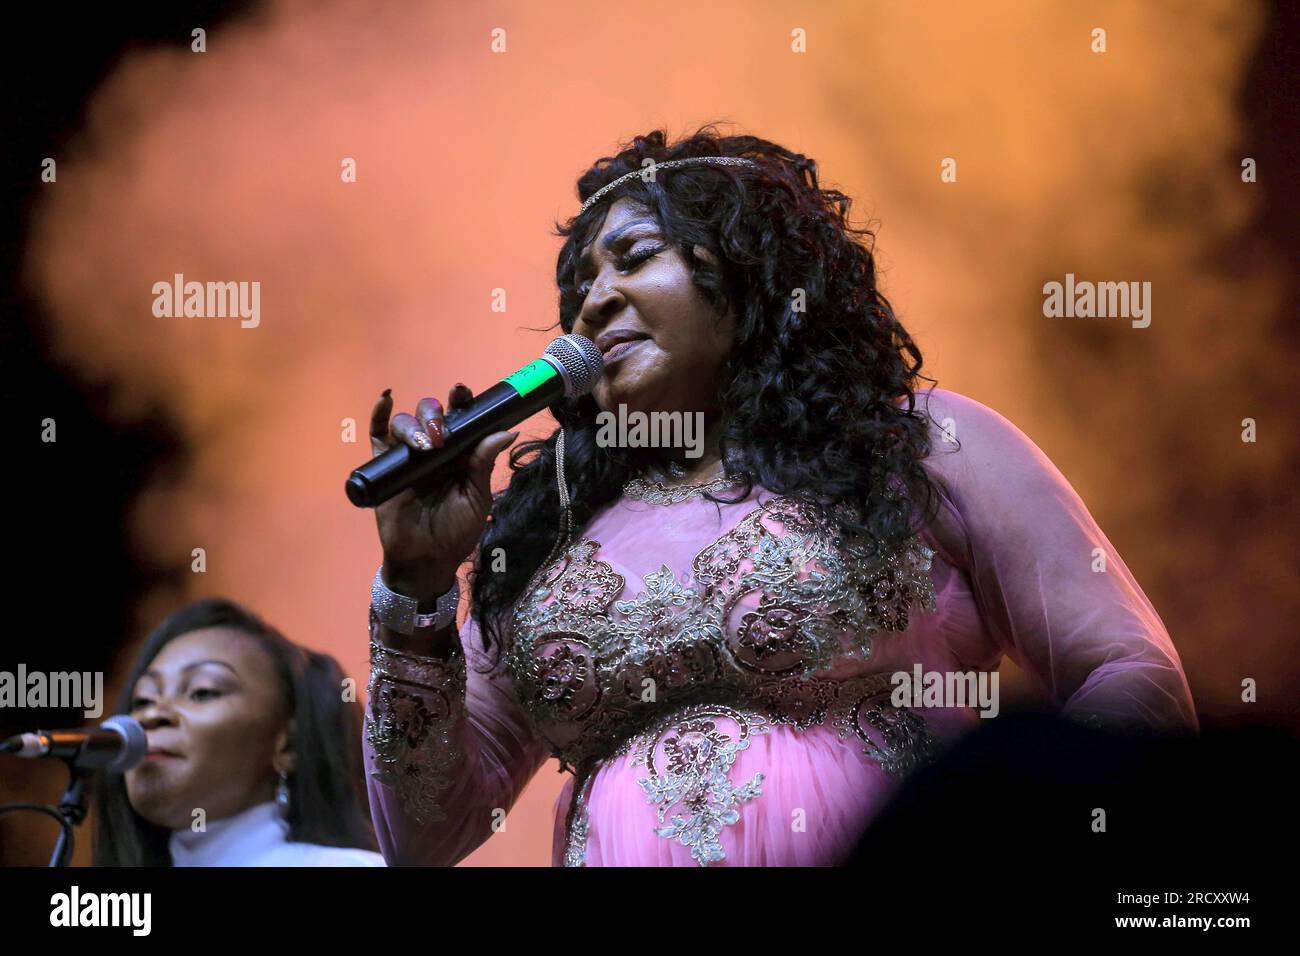 Singer artist from DR Congo, Mbilia Bel during her performance at the Amani Festival in Goma (Eastern DRC), February 15, 2020 Stock Photo